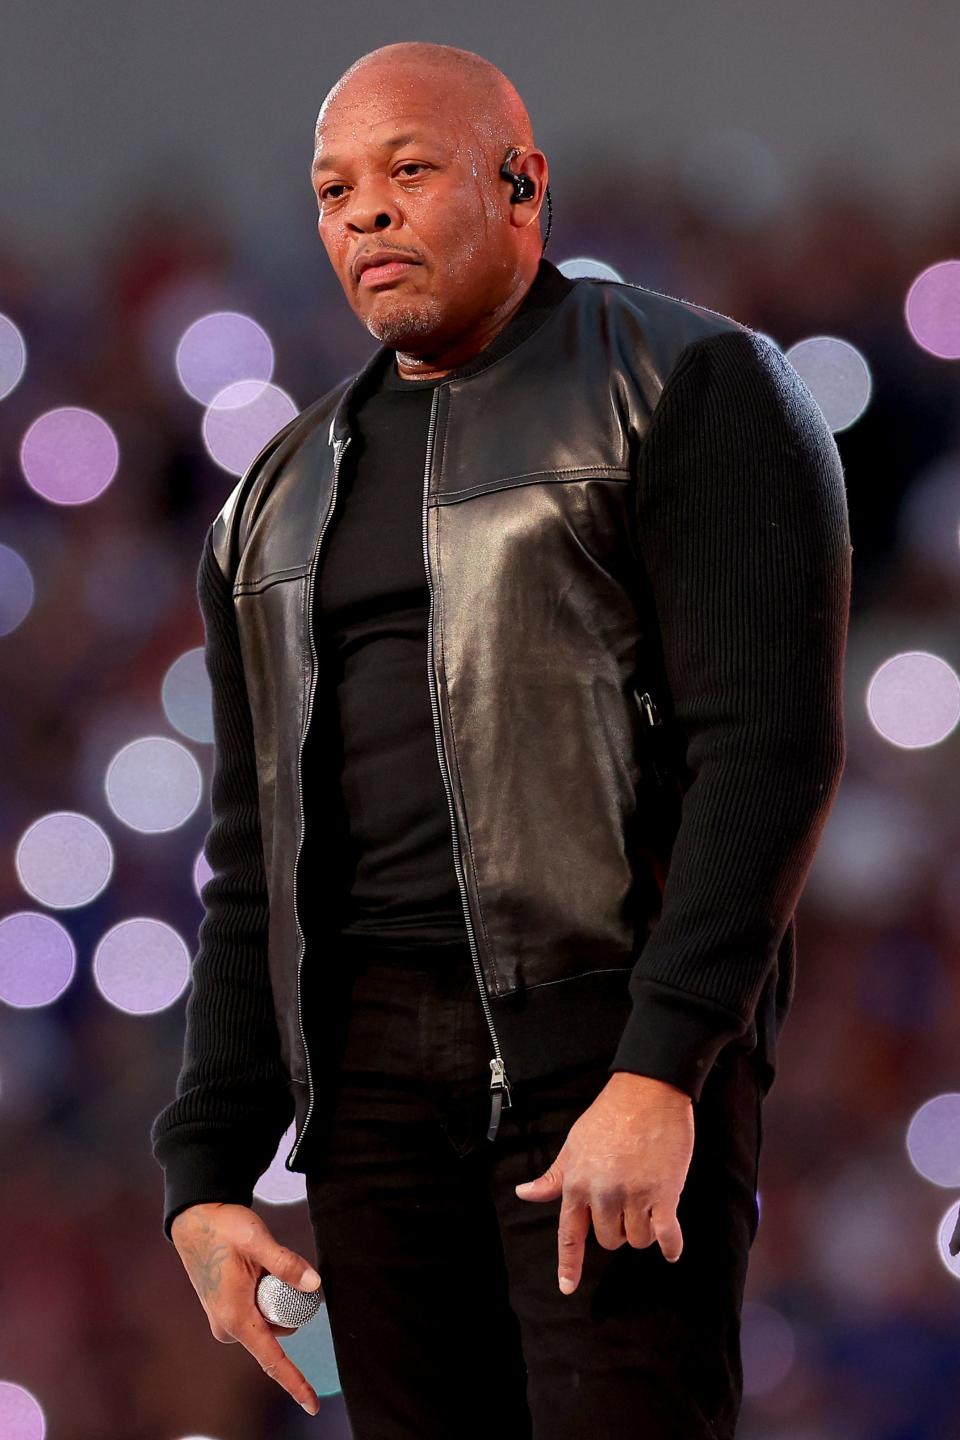 Dr, Dre, pictured during the halftime performance at Super Bowl LVI in 2022, is among the hip-hop acts in the spotlight with Black Friday Record Store Day releases.